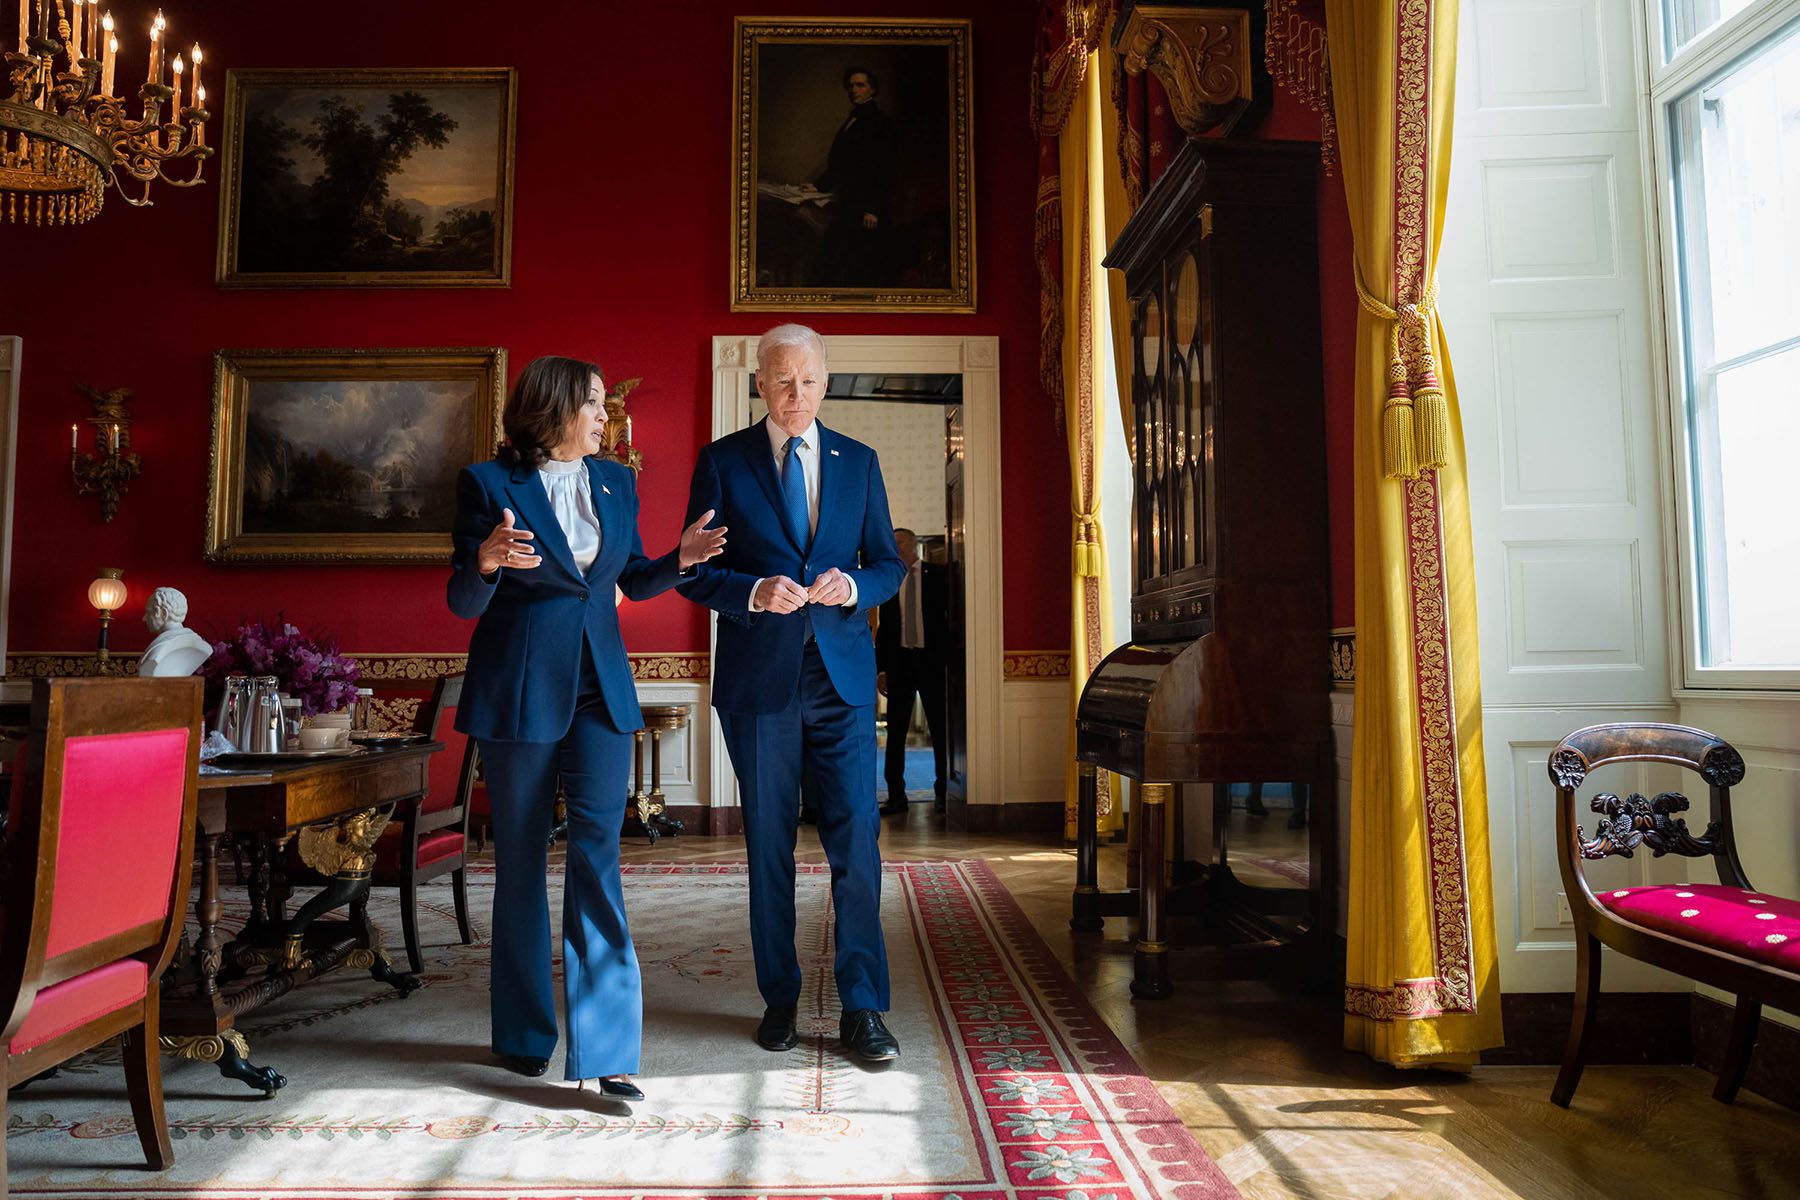 President Biden talks with Vice President Kamala Harris in the Red Room of the White House.